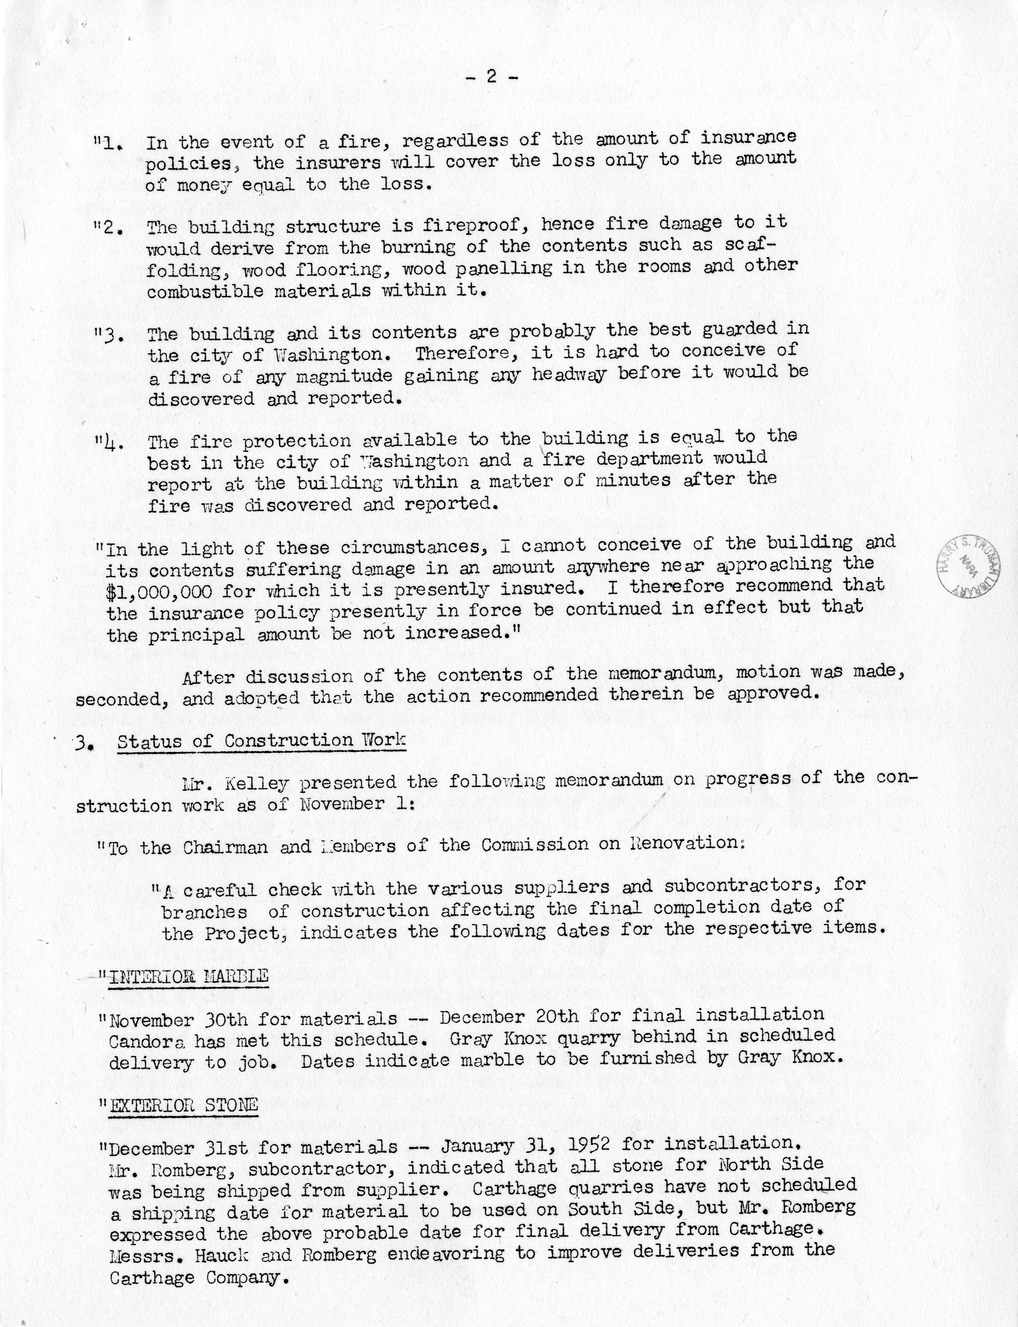 Minutes of the Fifty-Fourth Meeting of the Commission on Renovation of the Executive Mansion